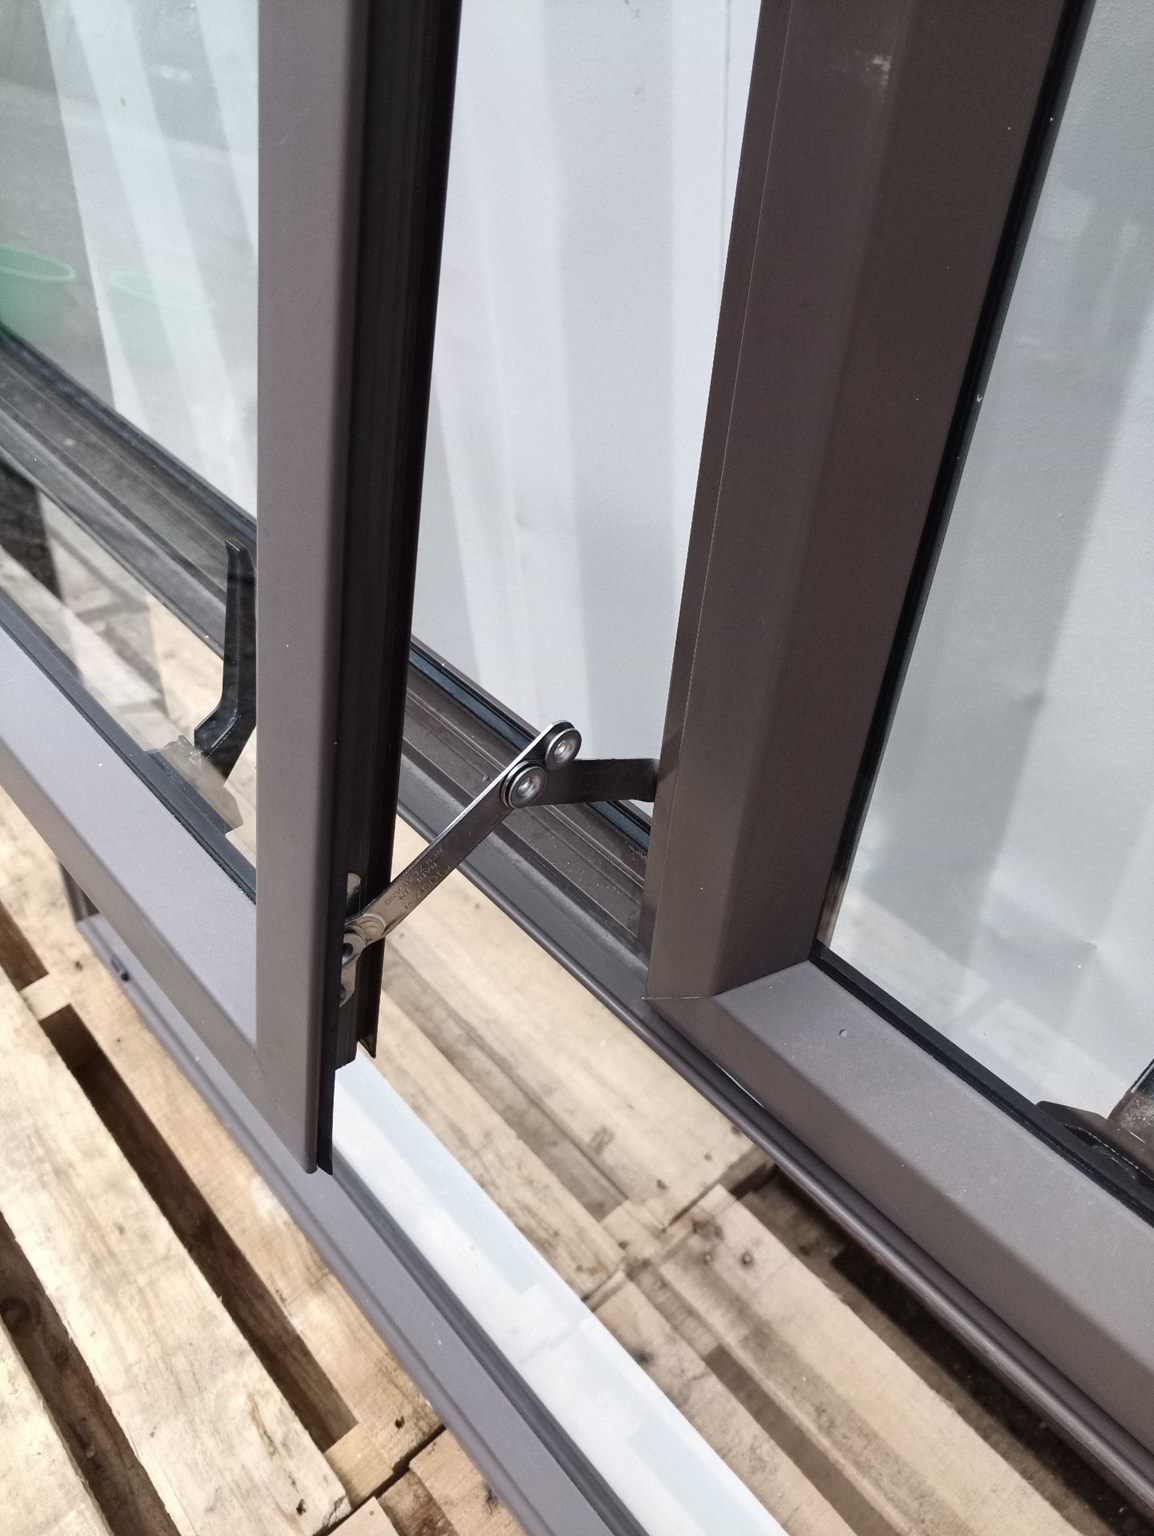 Aluminium Window Brown 1500 W x 1700 H [#3068 SF] Joinery Recycle